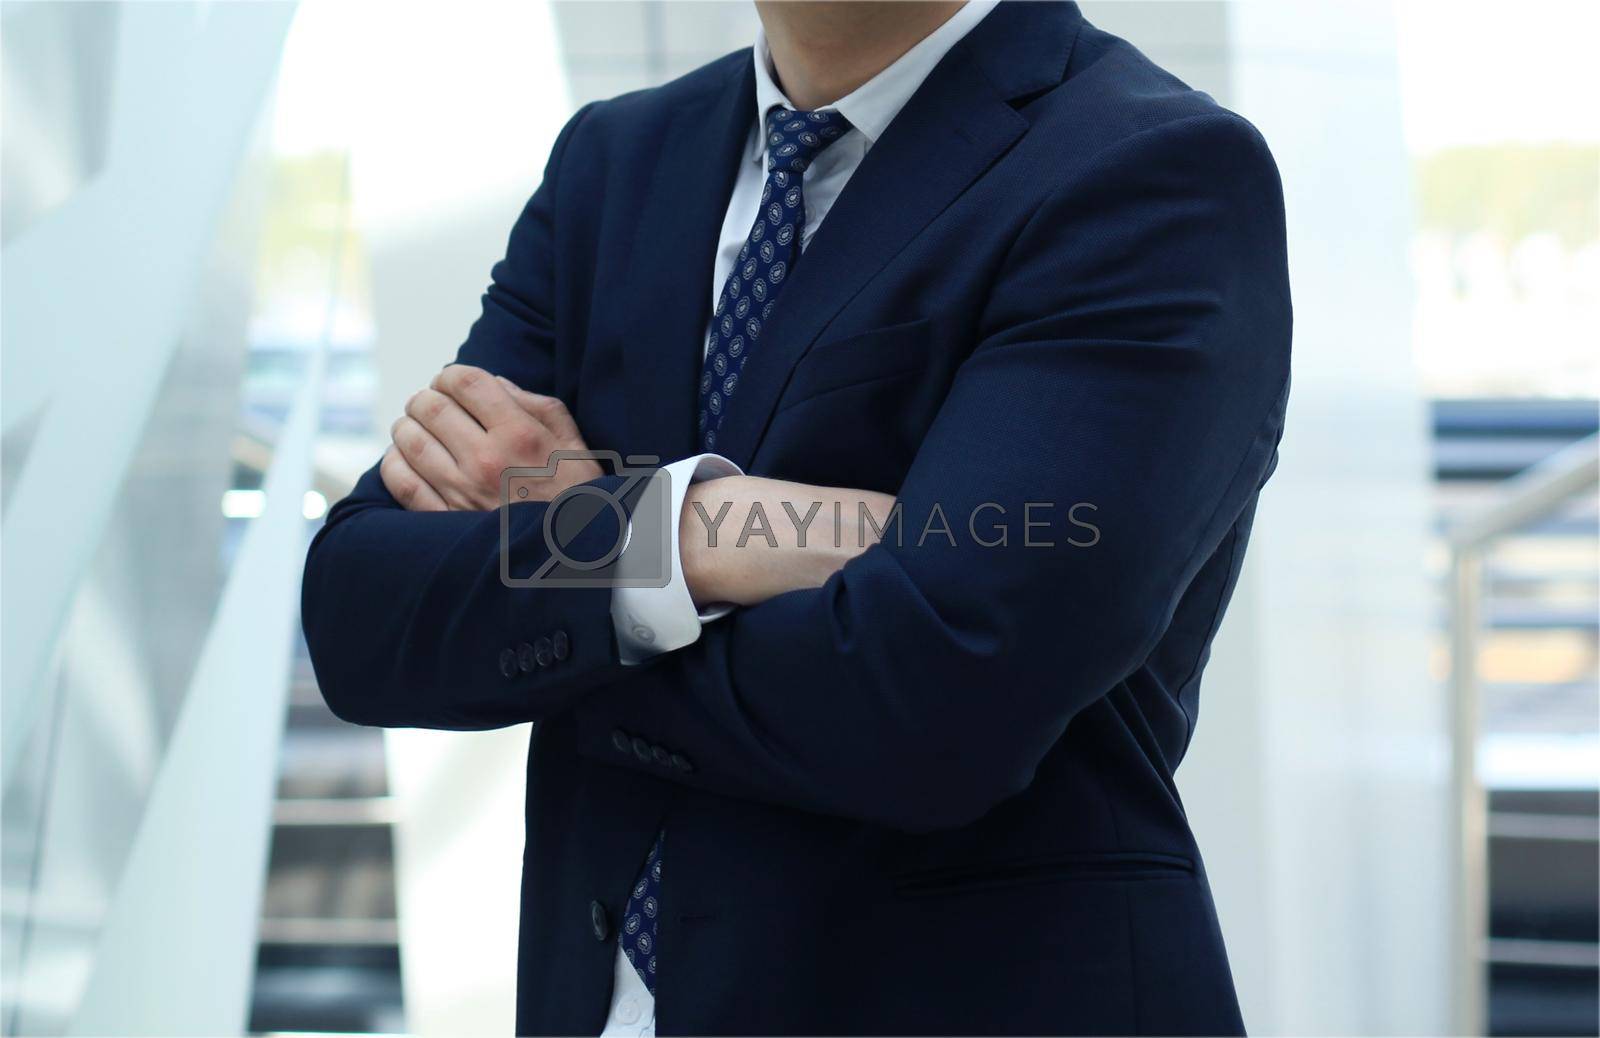 Royalty free image of suited man with arms crossed by tsyhun